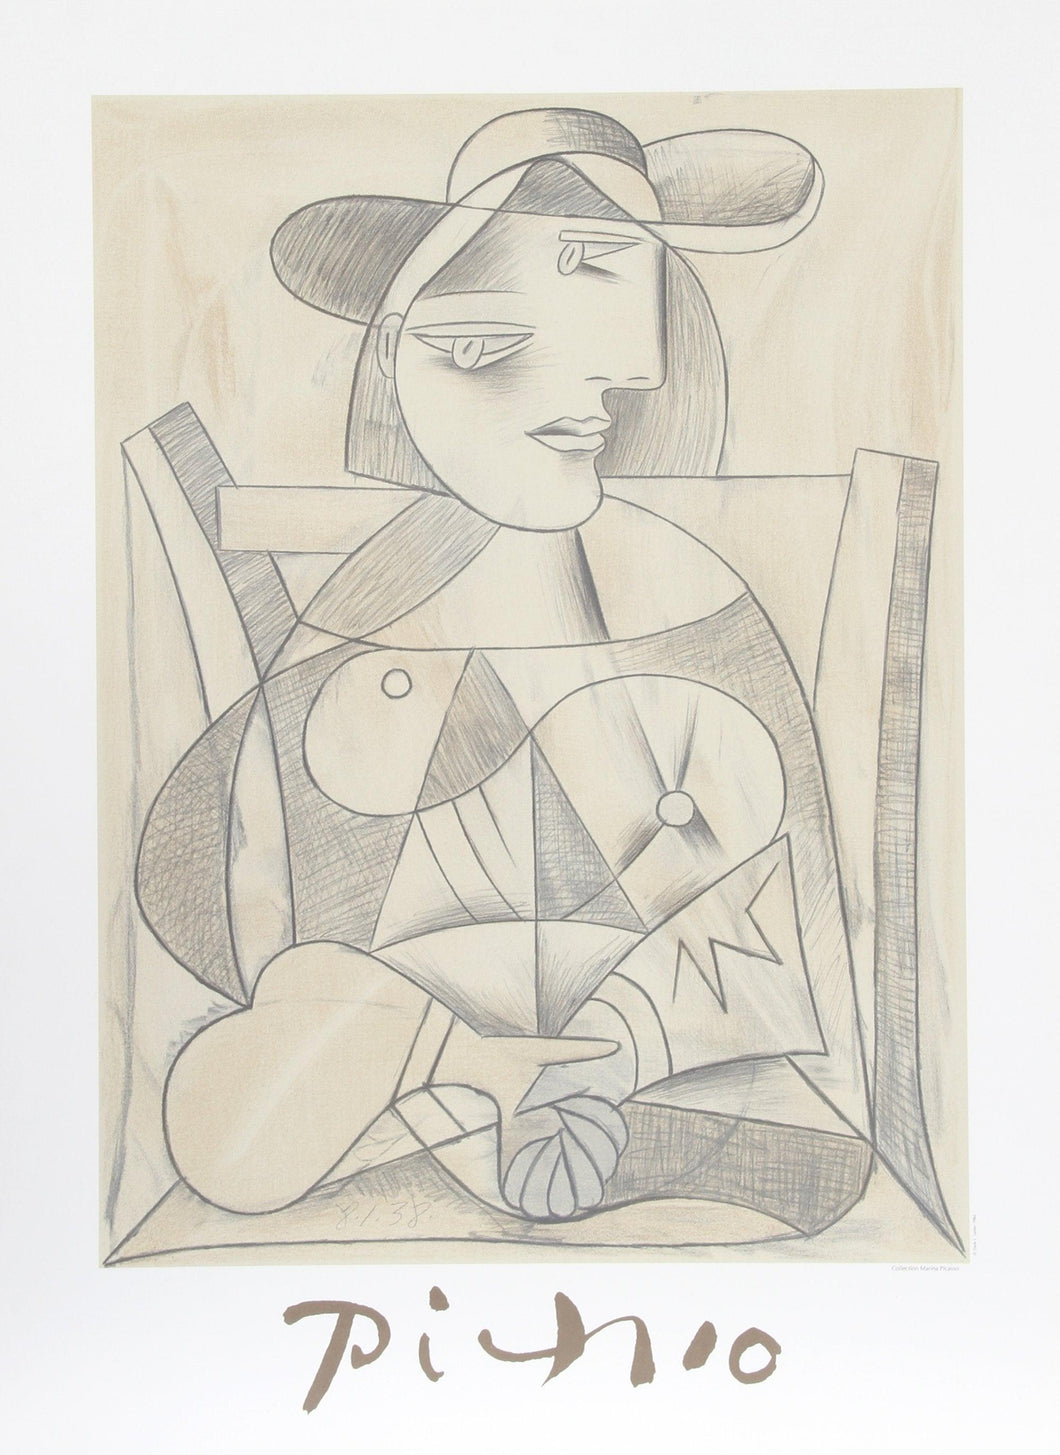 Femme aux Mains Jointes (Marie-Therese Walter) Lithograph | Pablo Picasso,{{product.type}}